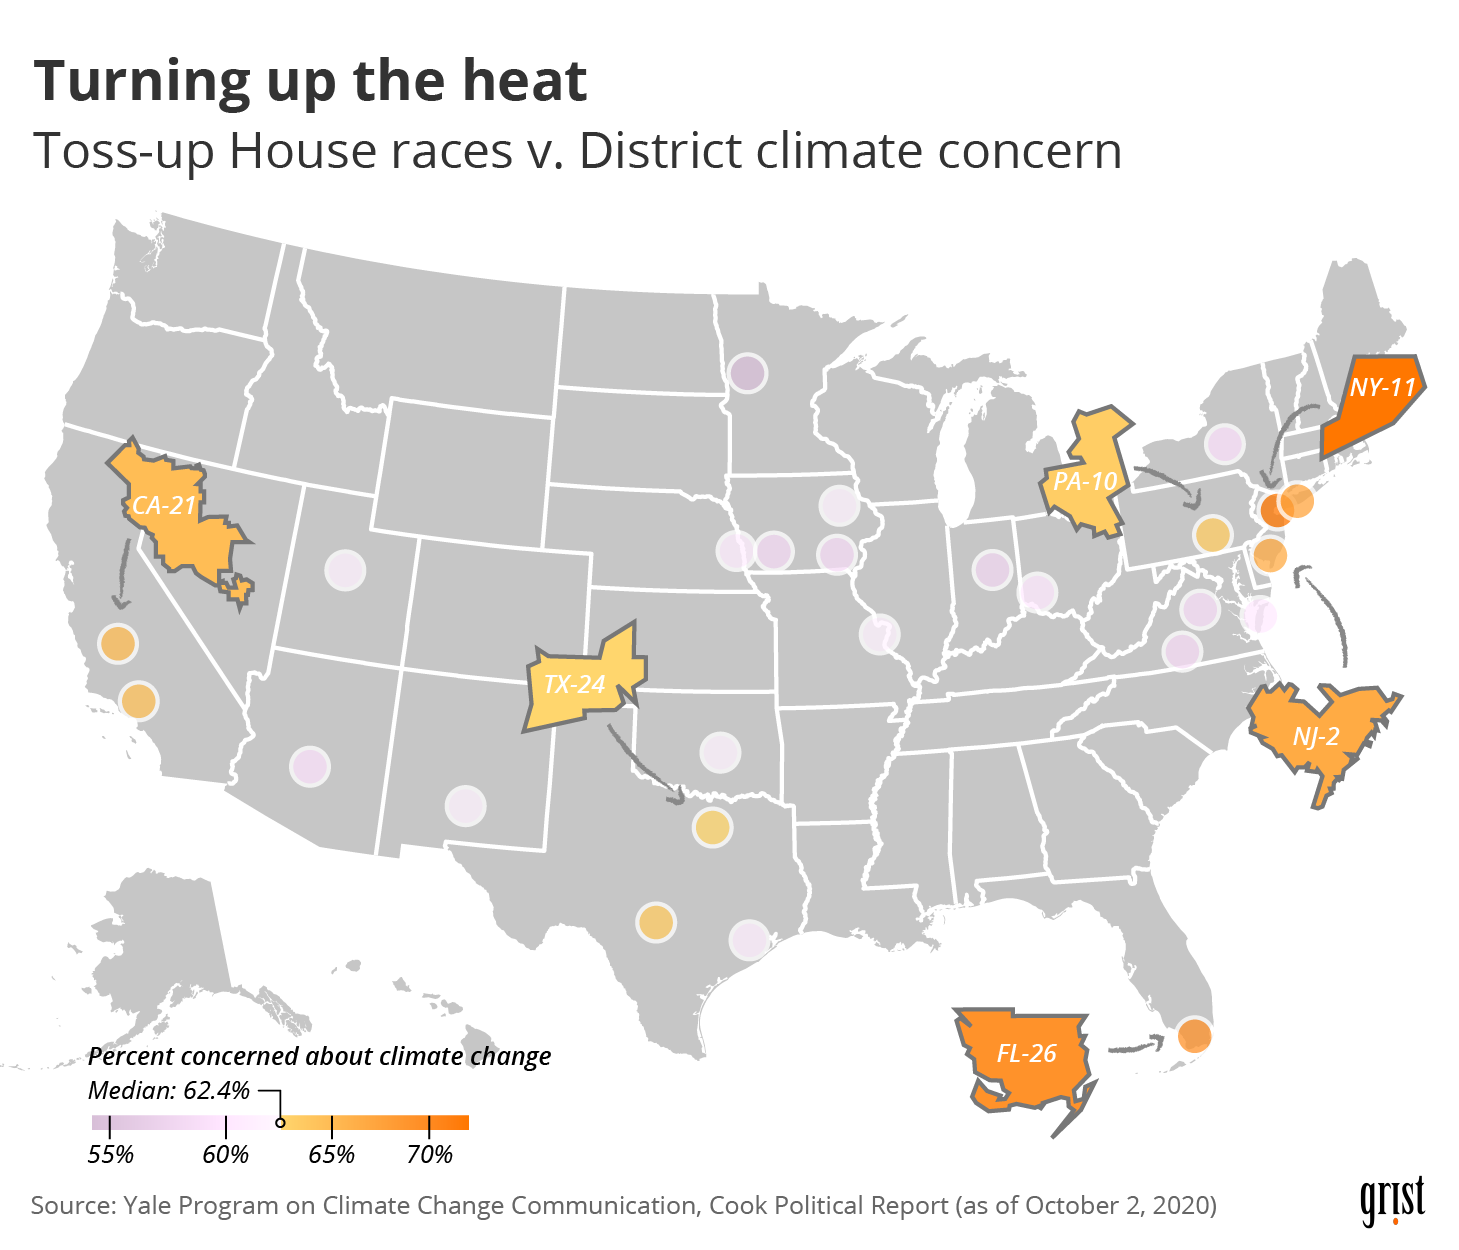 A map showing 2020 toss-up House races, colored by climate concern. Six districts of high climate-concern are highlighted: NY-11, NJ-2, PA-10, FL-26, TX-24, and CA-21.